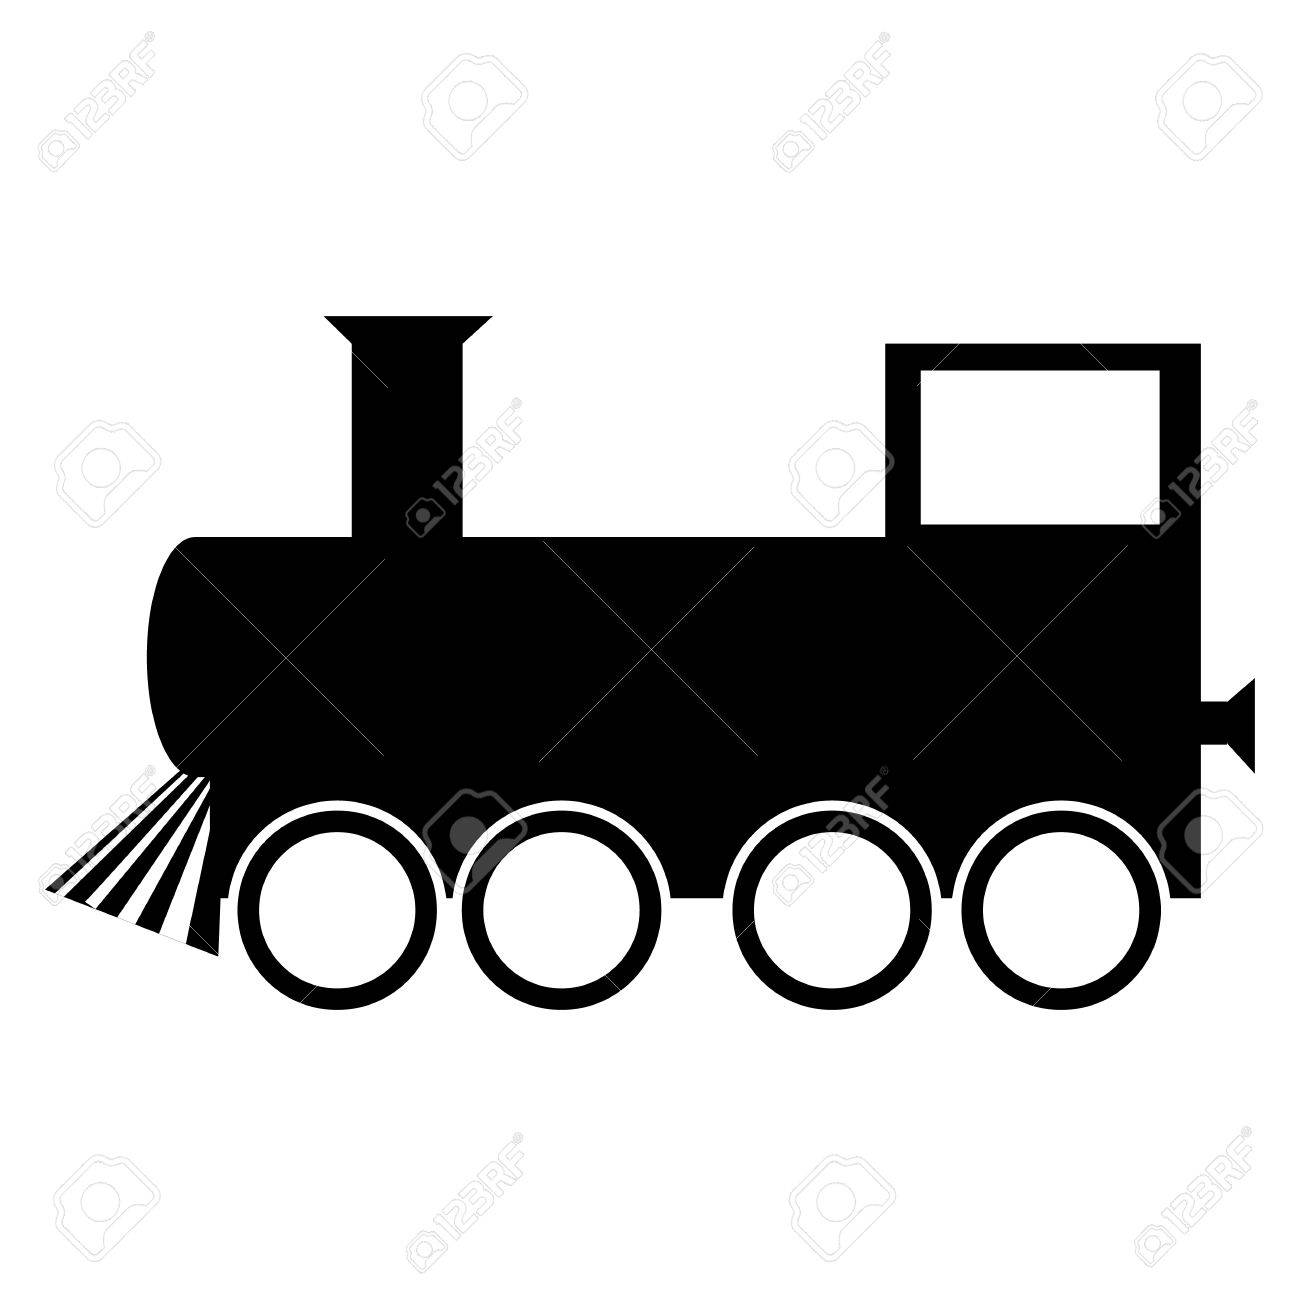 Old style steam engine locomotive icon in red and black colors 